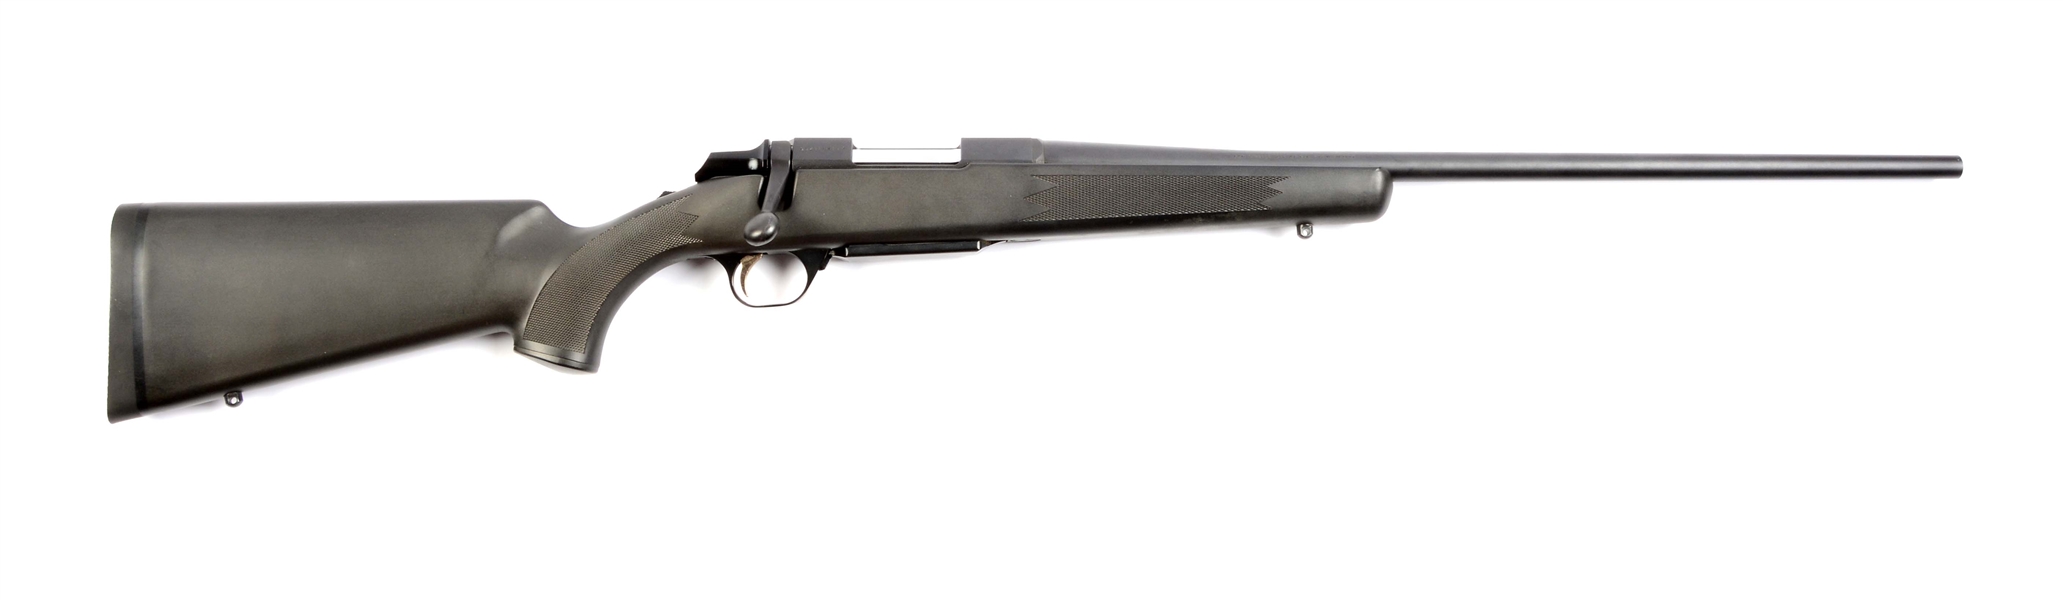 (M) BROWNING A-BOLT II BOLT ACTION RIFLE.